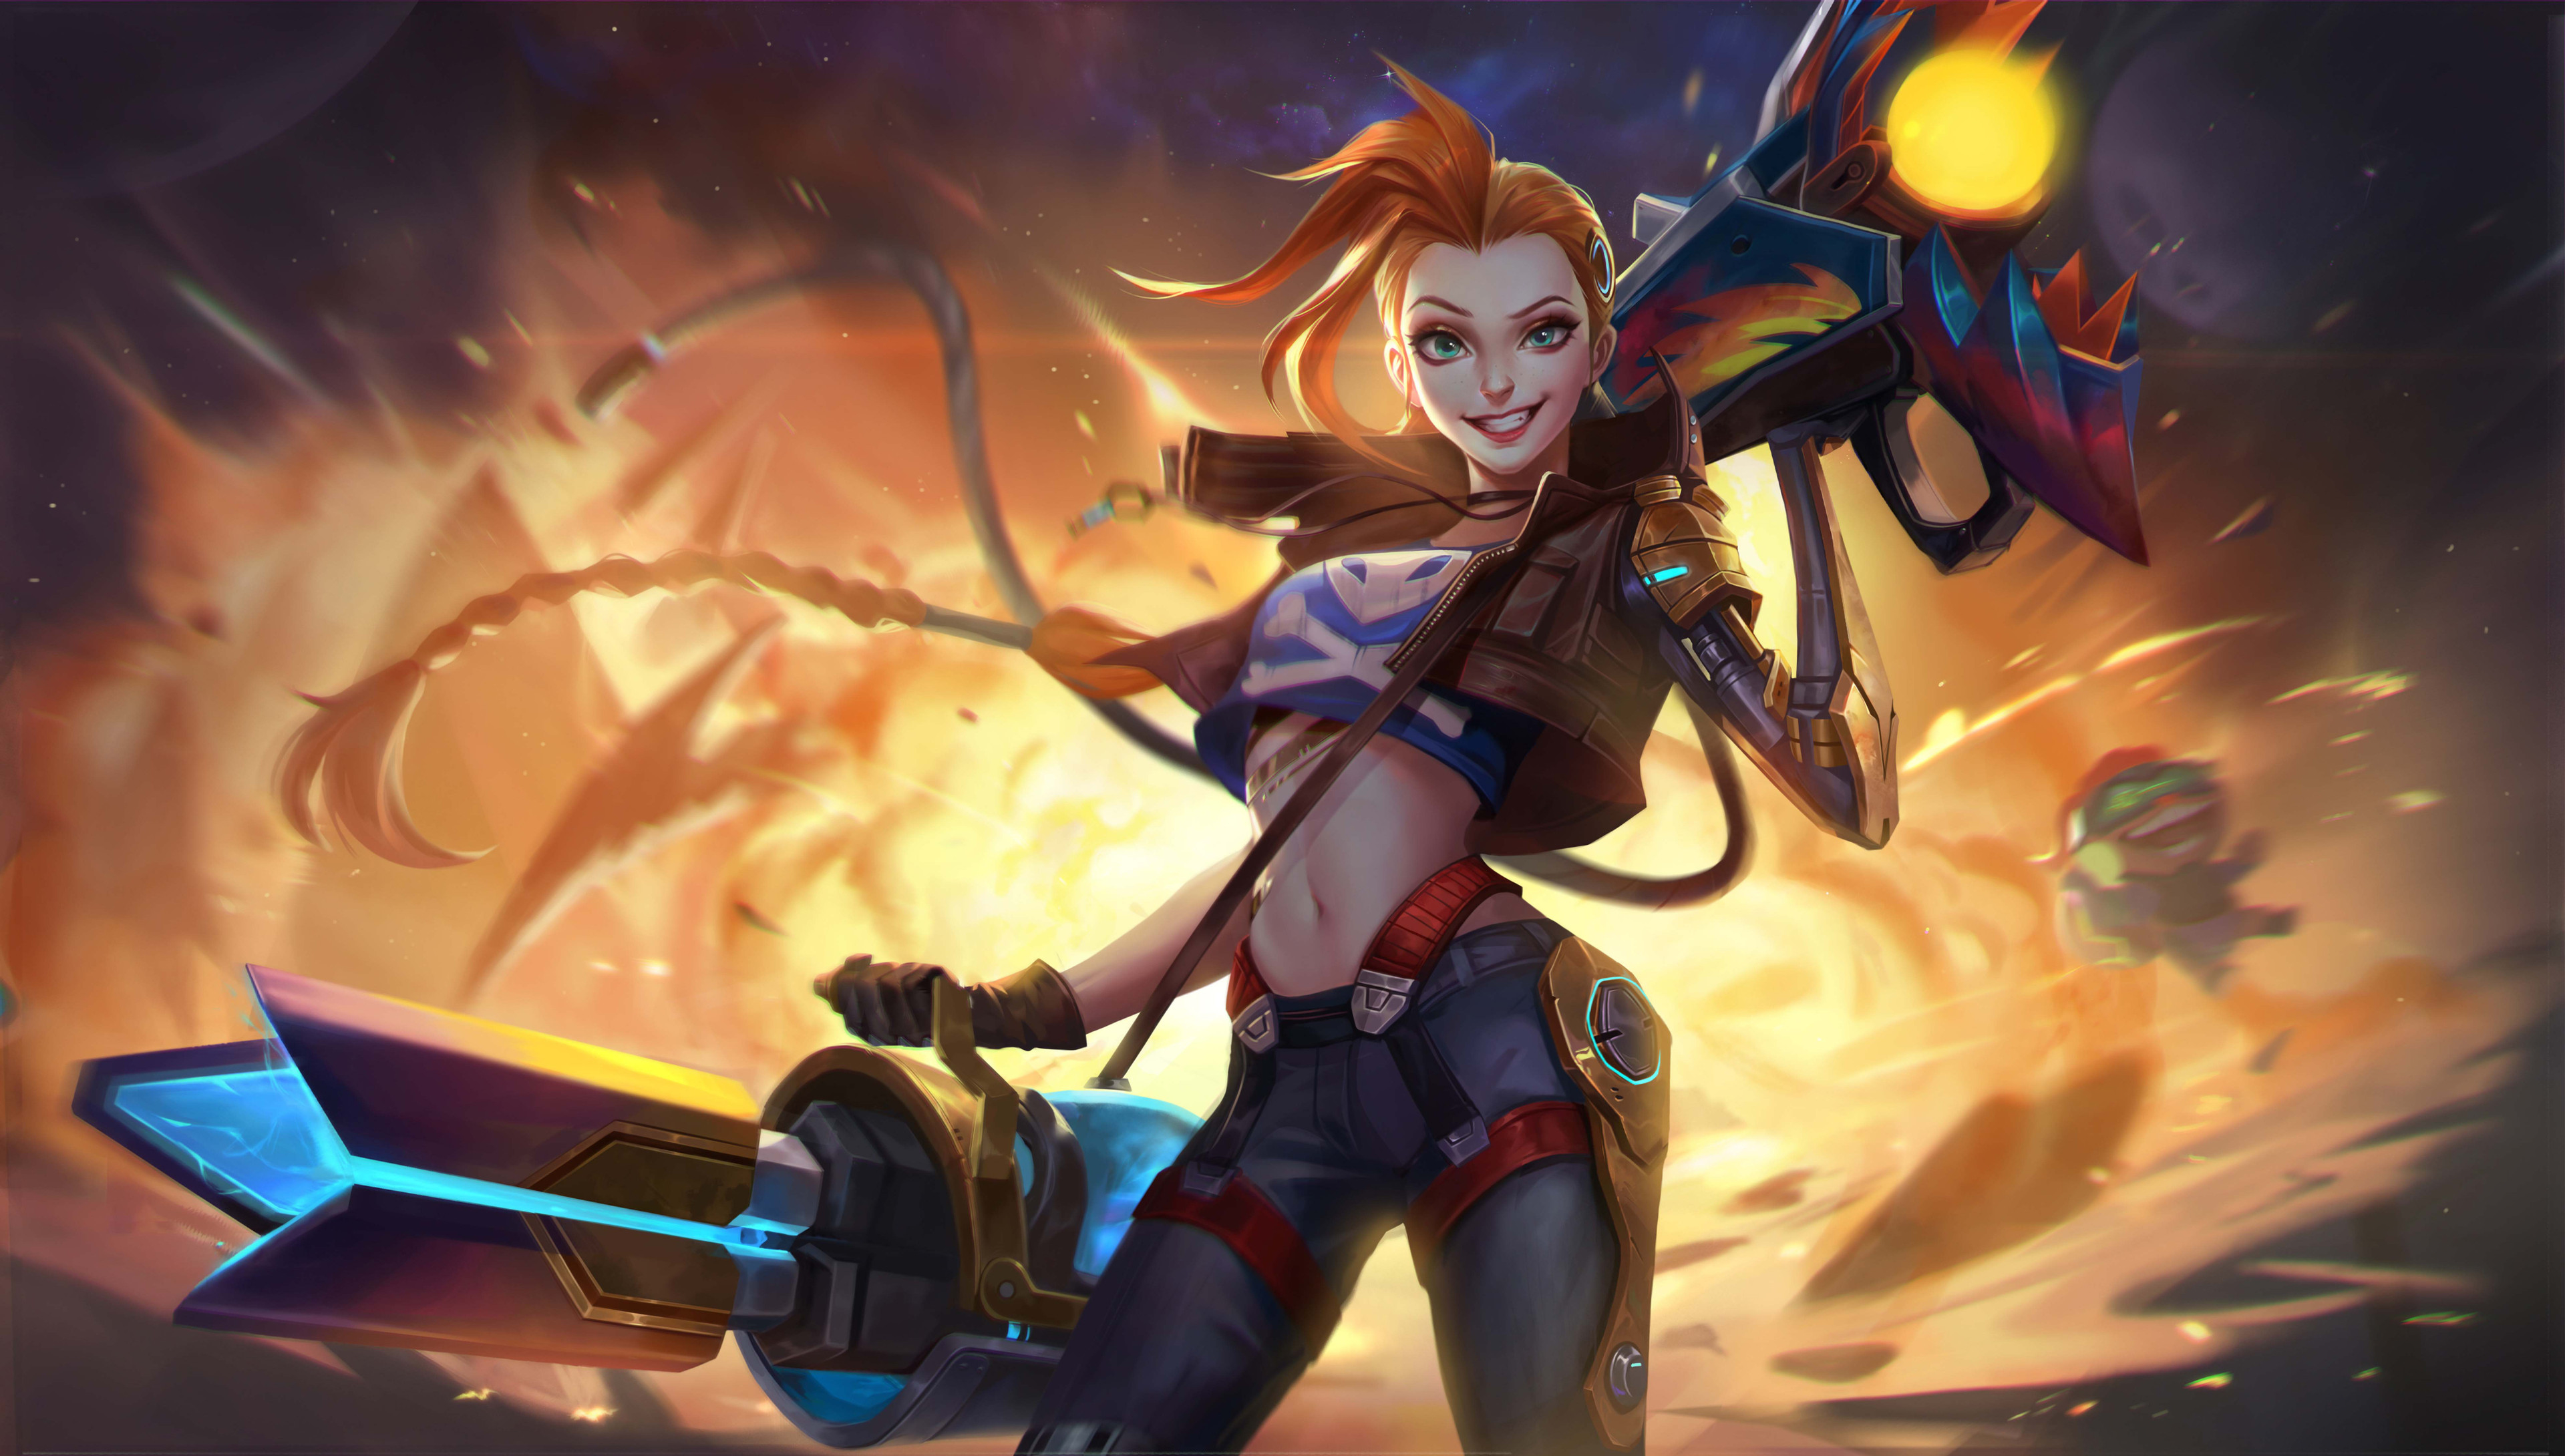 Jinx League Of Legends Warrior Wallpaper Hd Games 4k Wallpapers Images Photos And Background Wallpapers Den